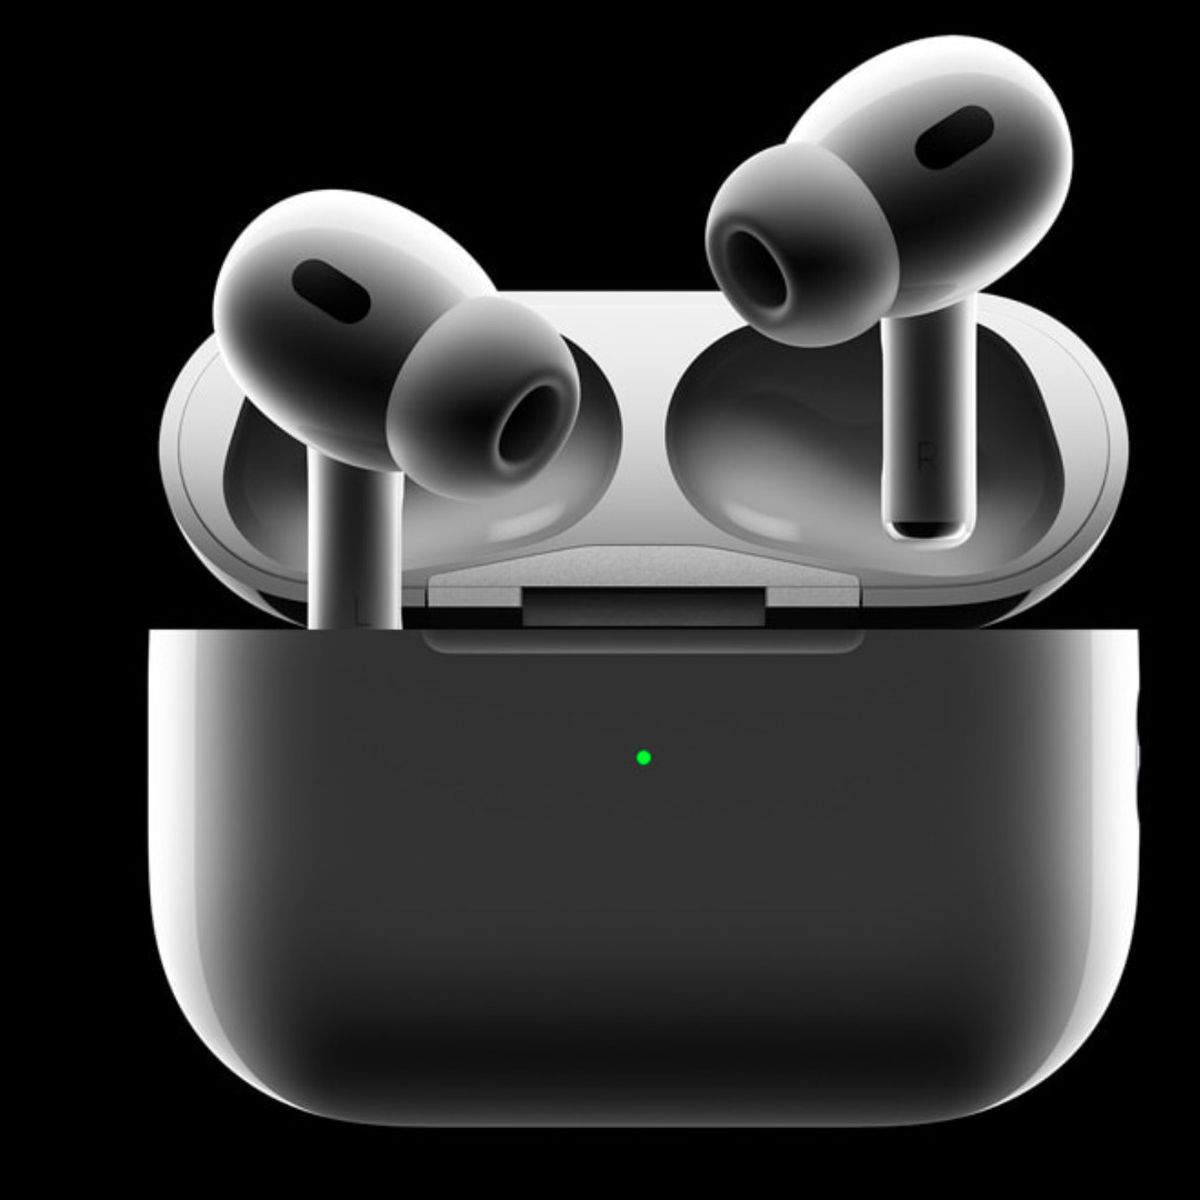 Apple AirPods Pro 2 mass production to begin during Q2 this year